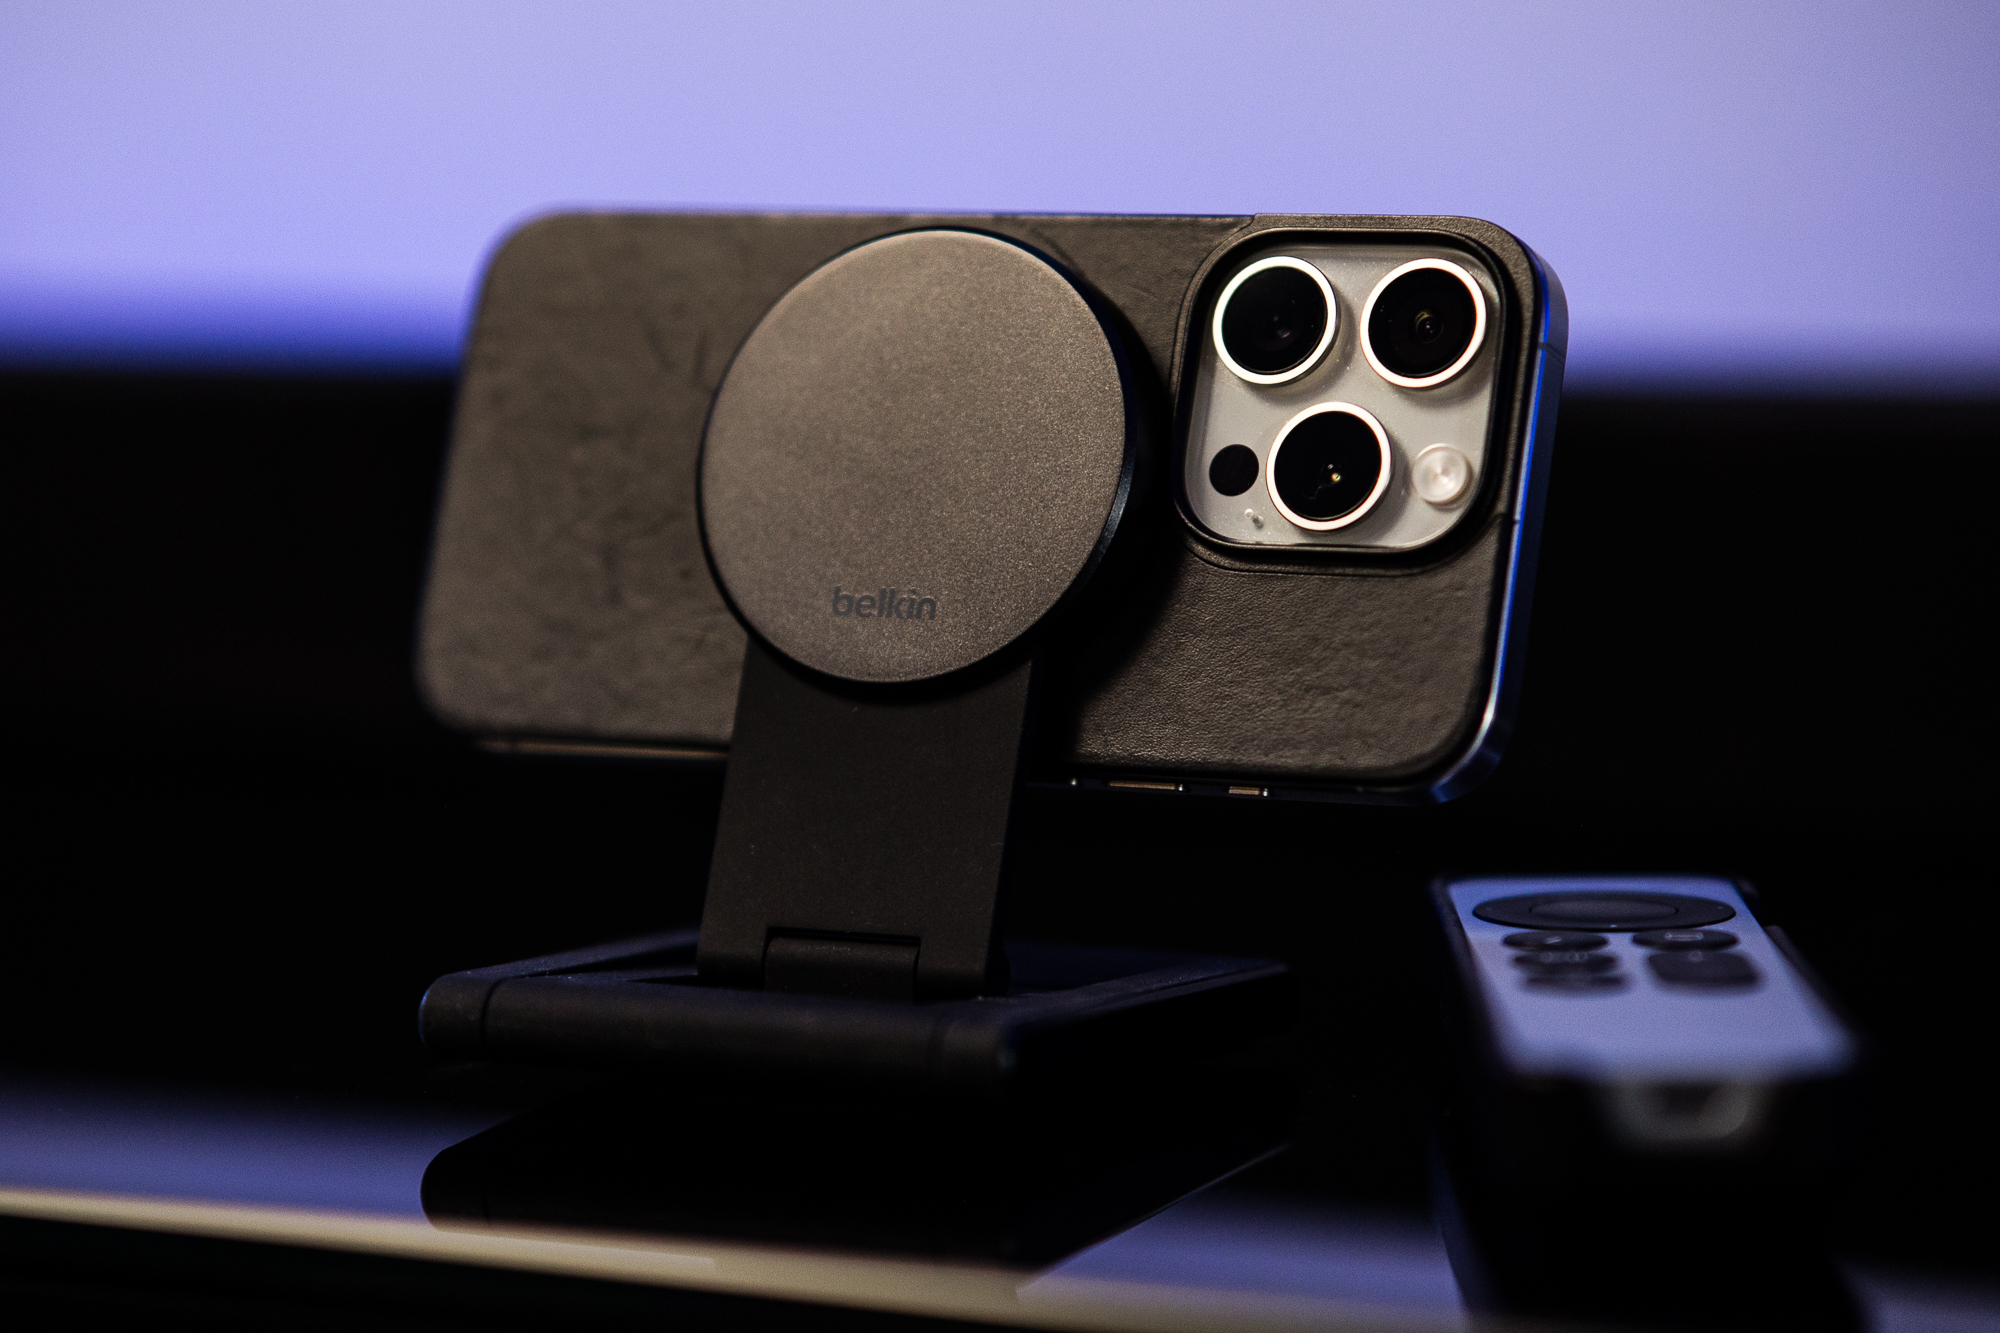 The Belkin iPhone Mount with MagSafe for Apple TV 4K in its stand mode.